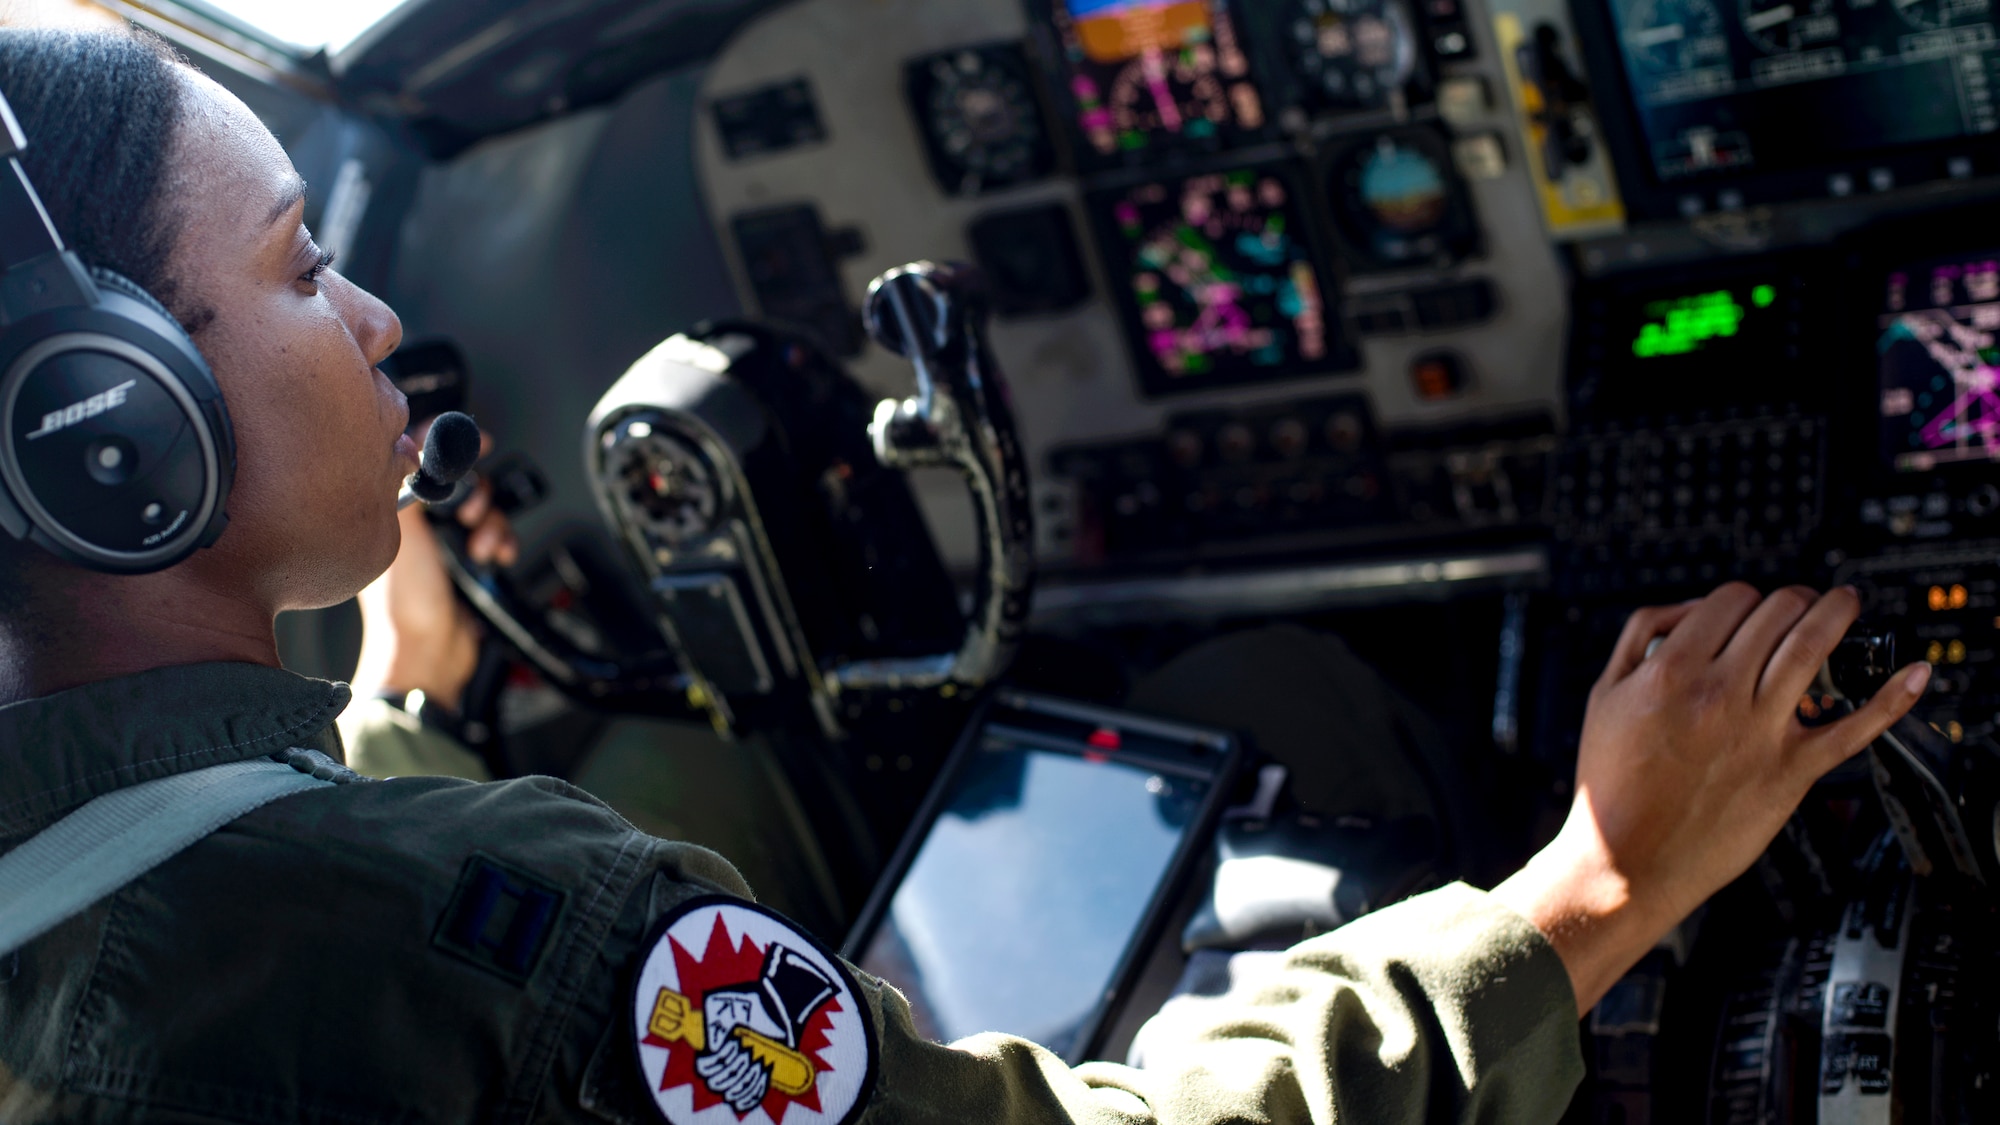 U.S. Air Force Capt. Jazmind Roberts, 93rd Air Refueling Squadron executive officer and pilot, navigates a KC-135 Stratotanker during an all-women flight over the Pacific Northwest area, Mar. 8, 2019. According to the Air Force Personnel Center, women currently make up 20.3 percent of the Air Force, a drastic increase of 17.1 percent since 1973, according to Pew Research. (U.S. Air Force photo by Airman 1st Class Whitney Laine)